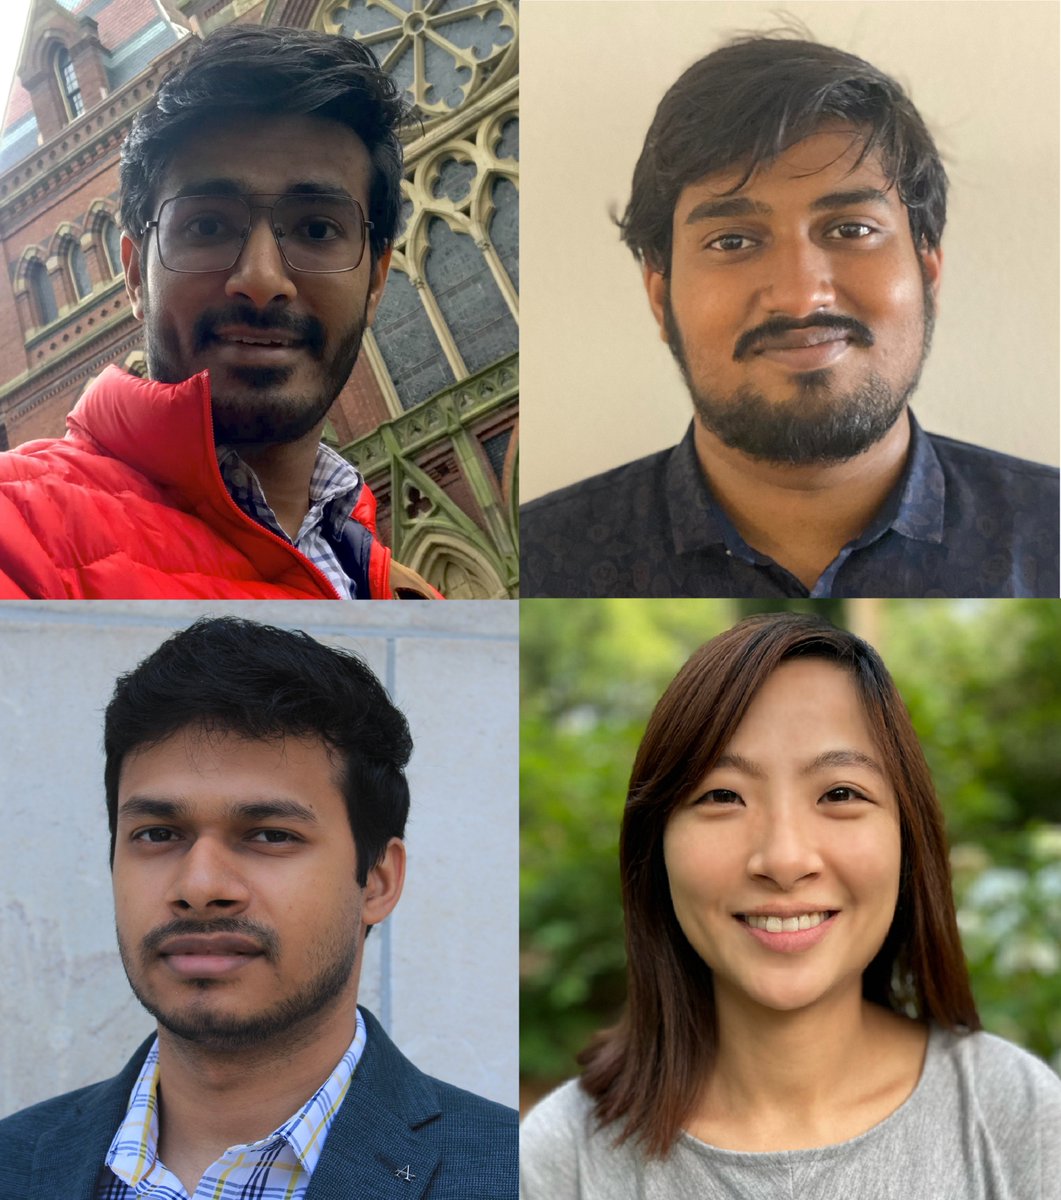 The Committee on Diversity and Inclusion announced the recipients of the 2023 Travel Grant Award! Clockwise from top left: Geet Gupta, Pranav Roy, YingYu Lin, Bishwa Ranjan Si. (1) #hopkinsengineer #johnshopkins